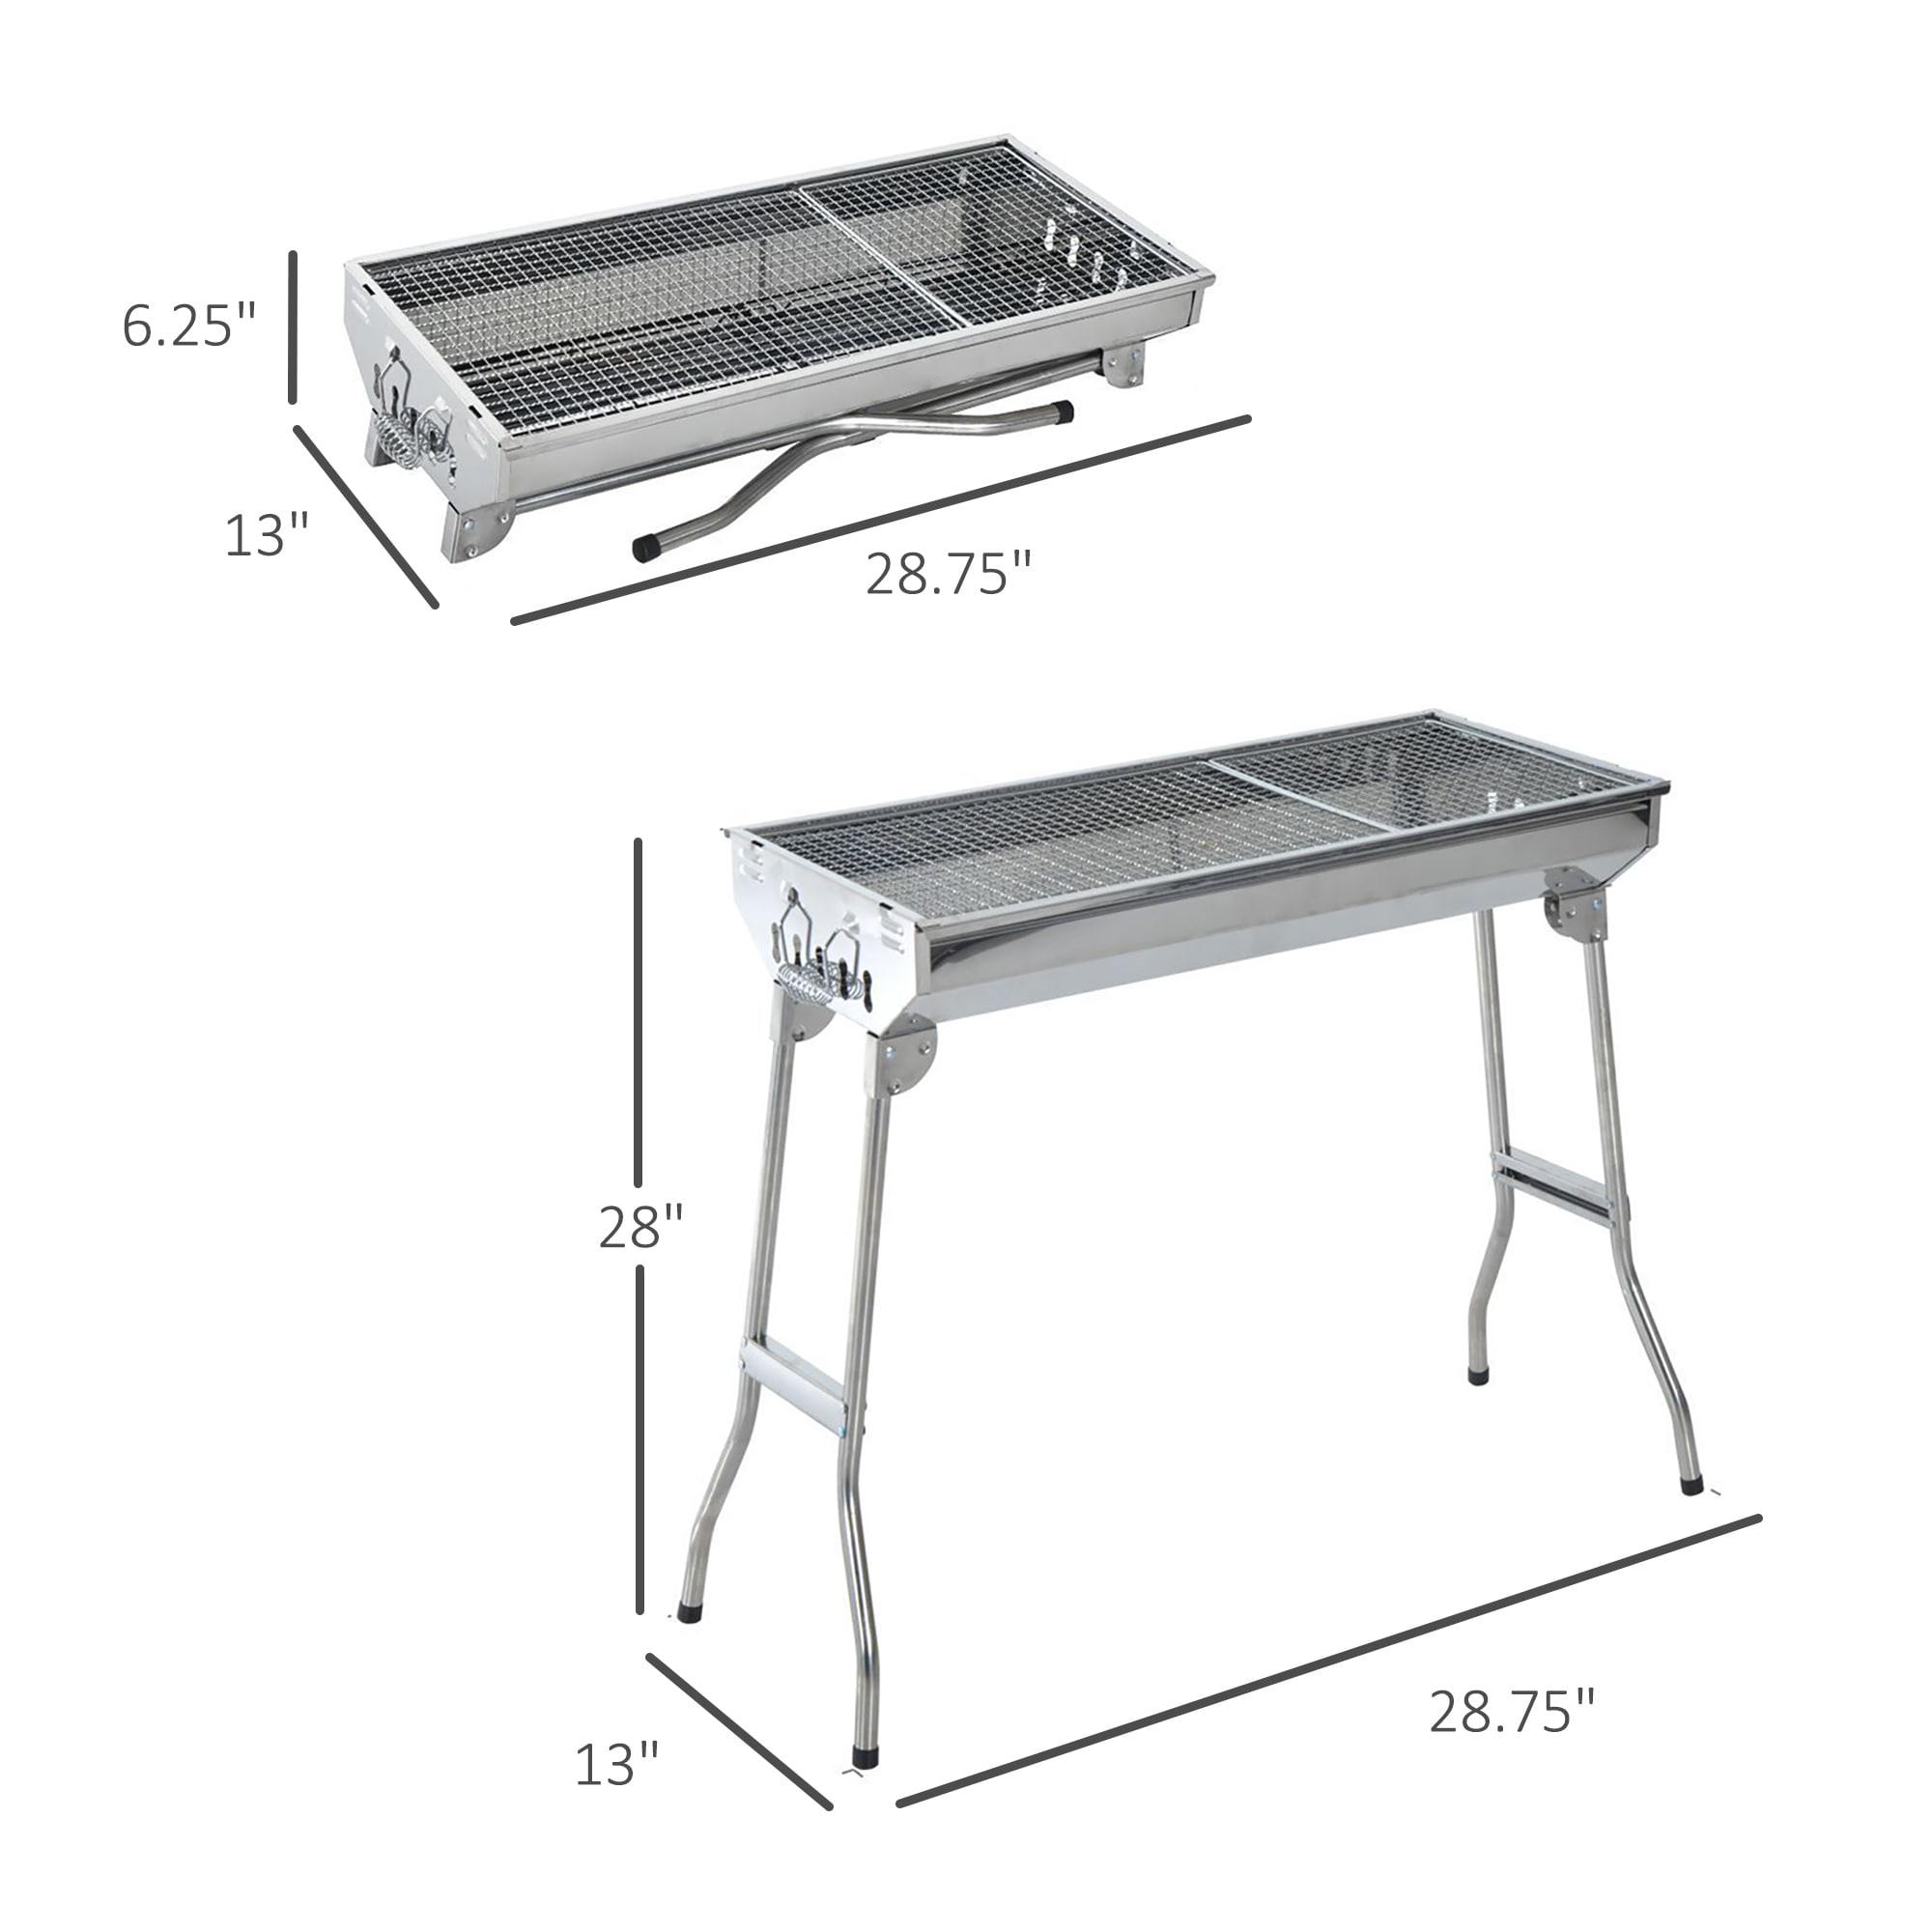 Outsunny 37.5 in. Steel Square Portable Outdoor Backyard Charcoal